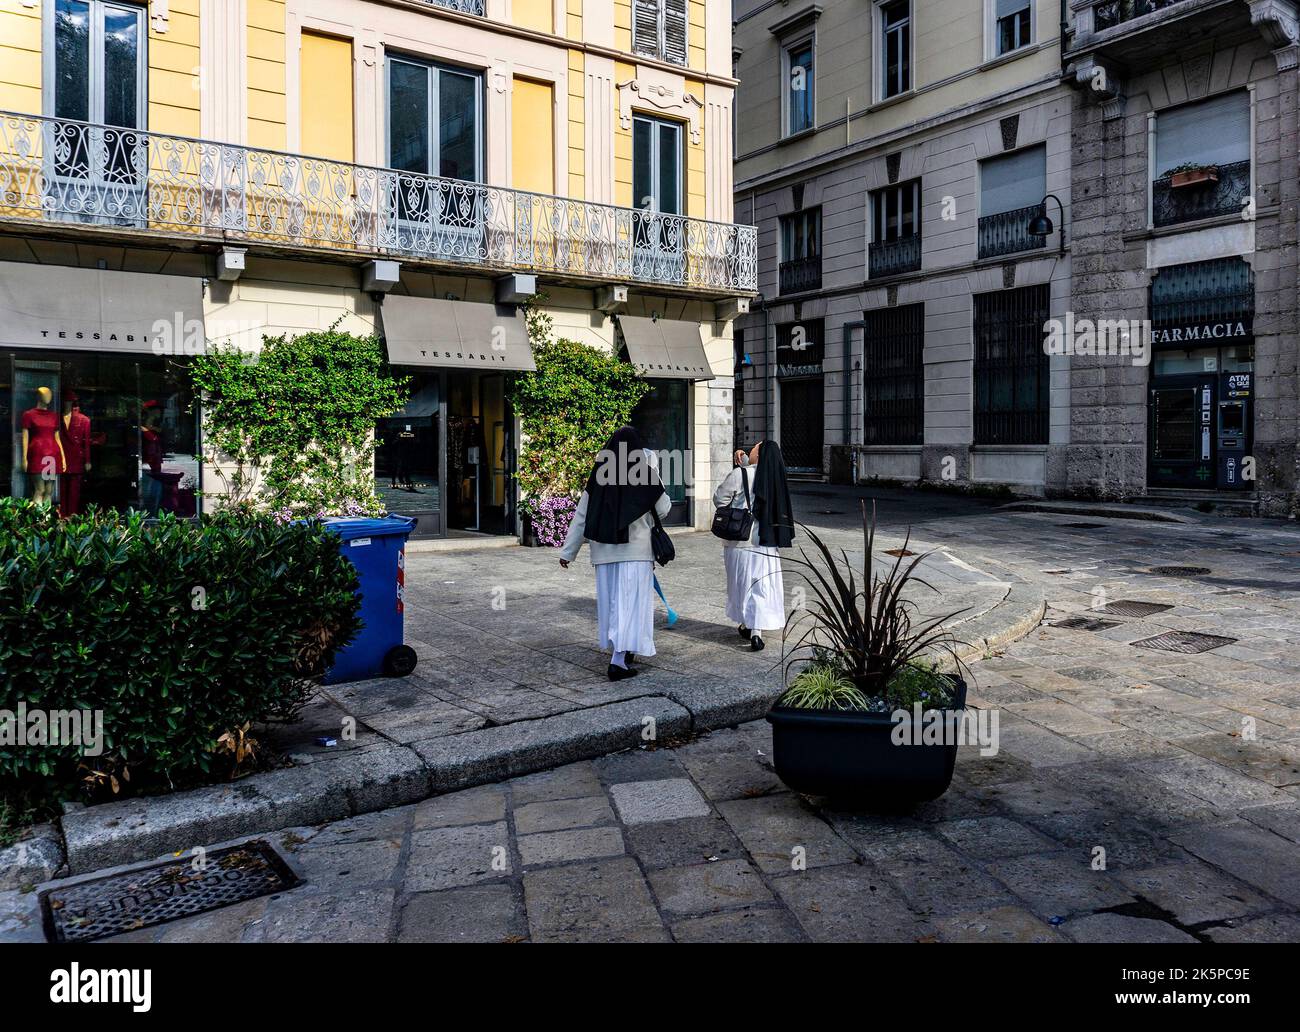 Two members of The Missionaries of Charity, an order of nuns, on the streets of Como, Italy. Stock Photo